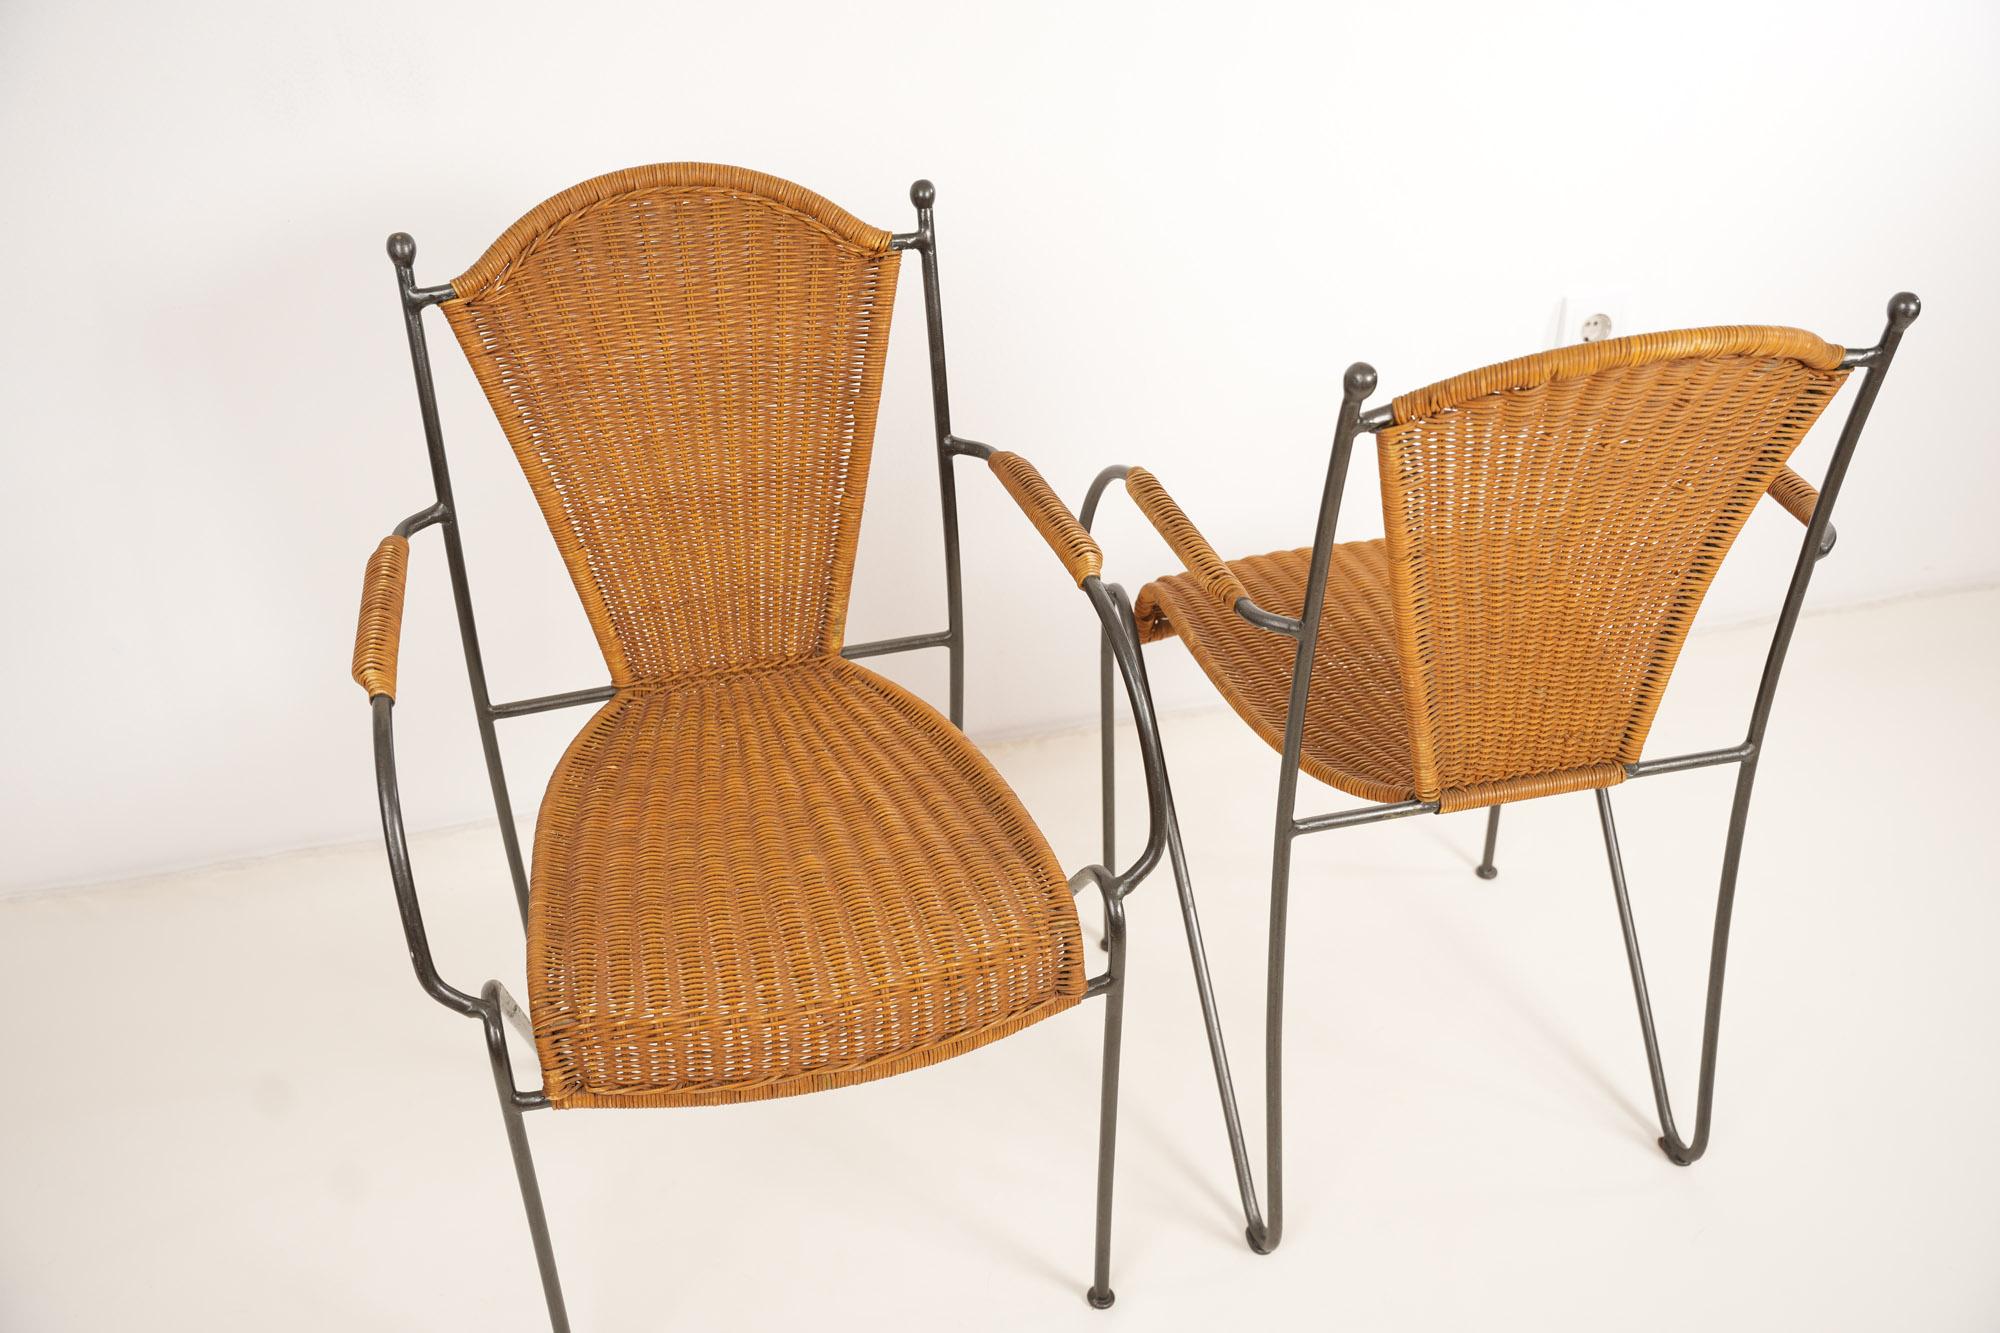 Mid-20th Century Set of Four Wicker and Iron Chair By Frederic Weinberg 1950s For Sale